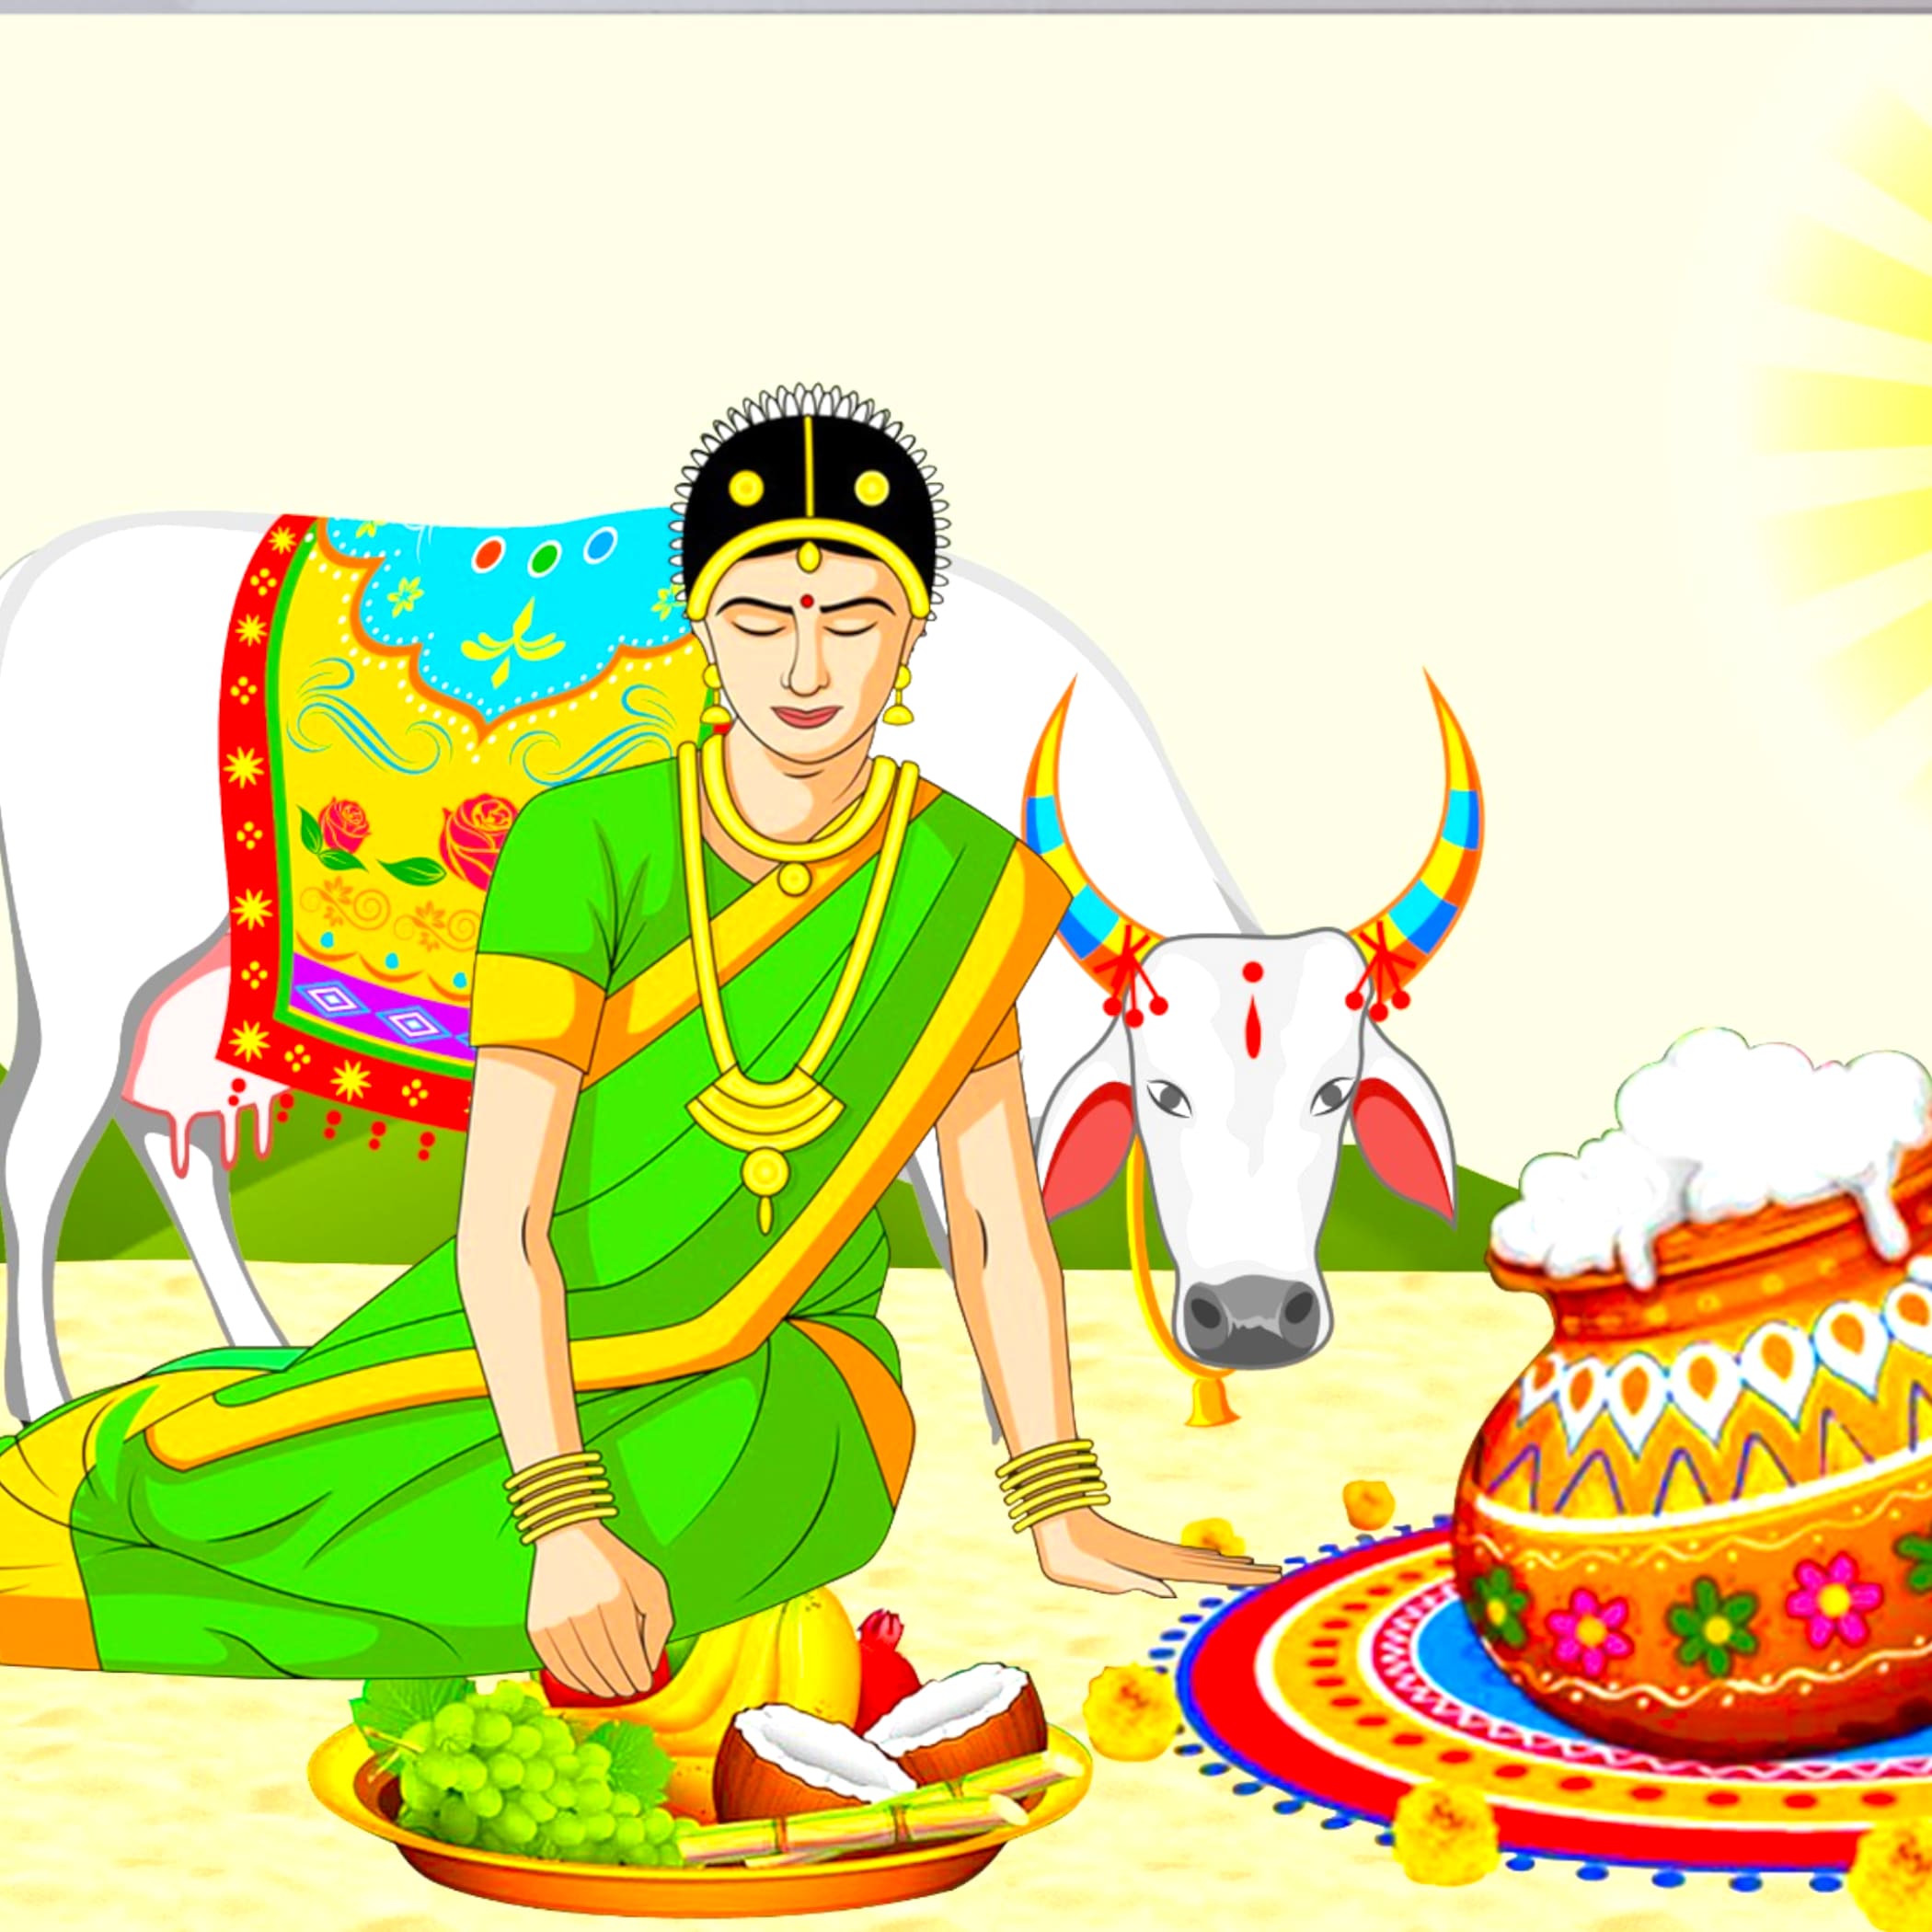 100,000 Tamil festival Vector Images | Depositphotos